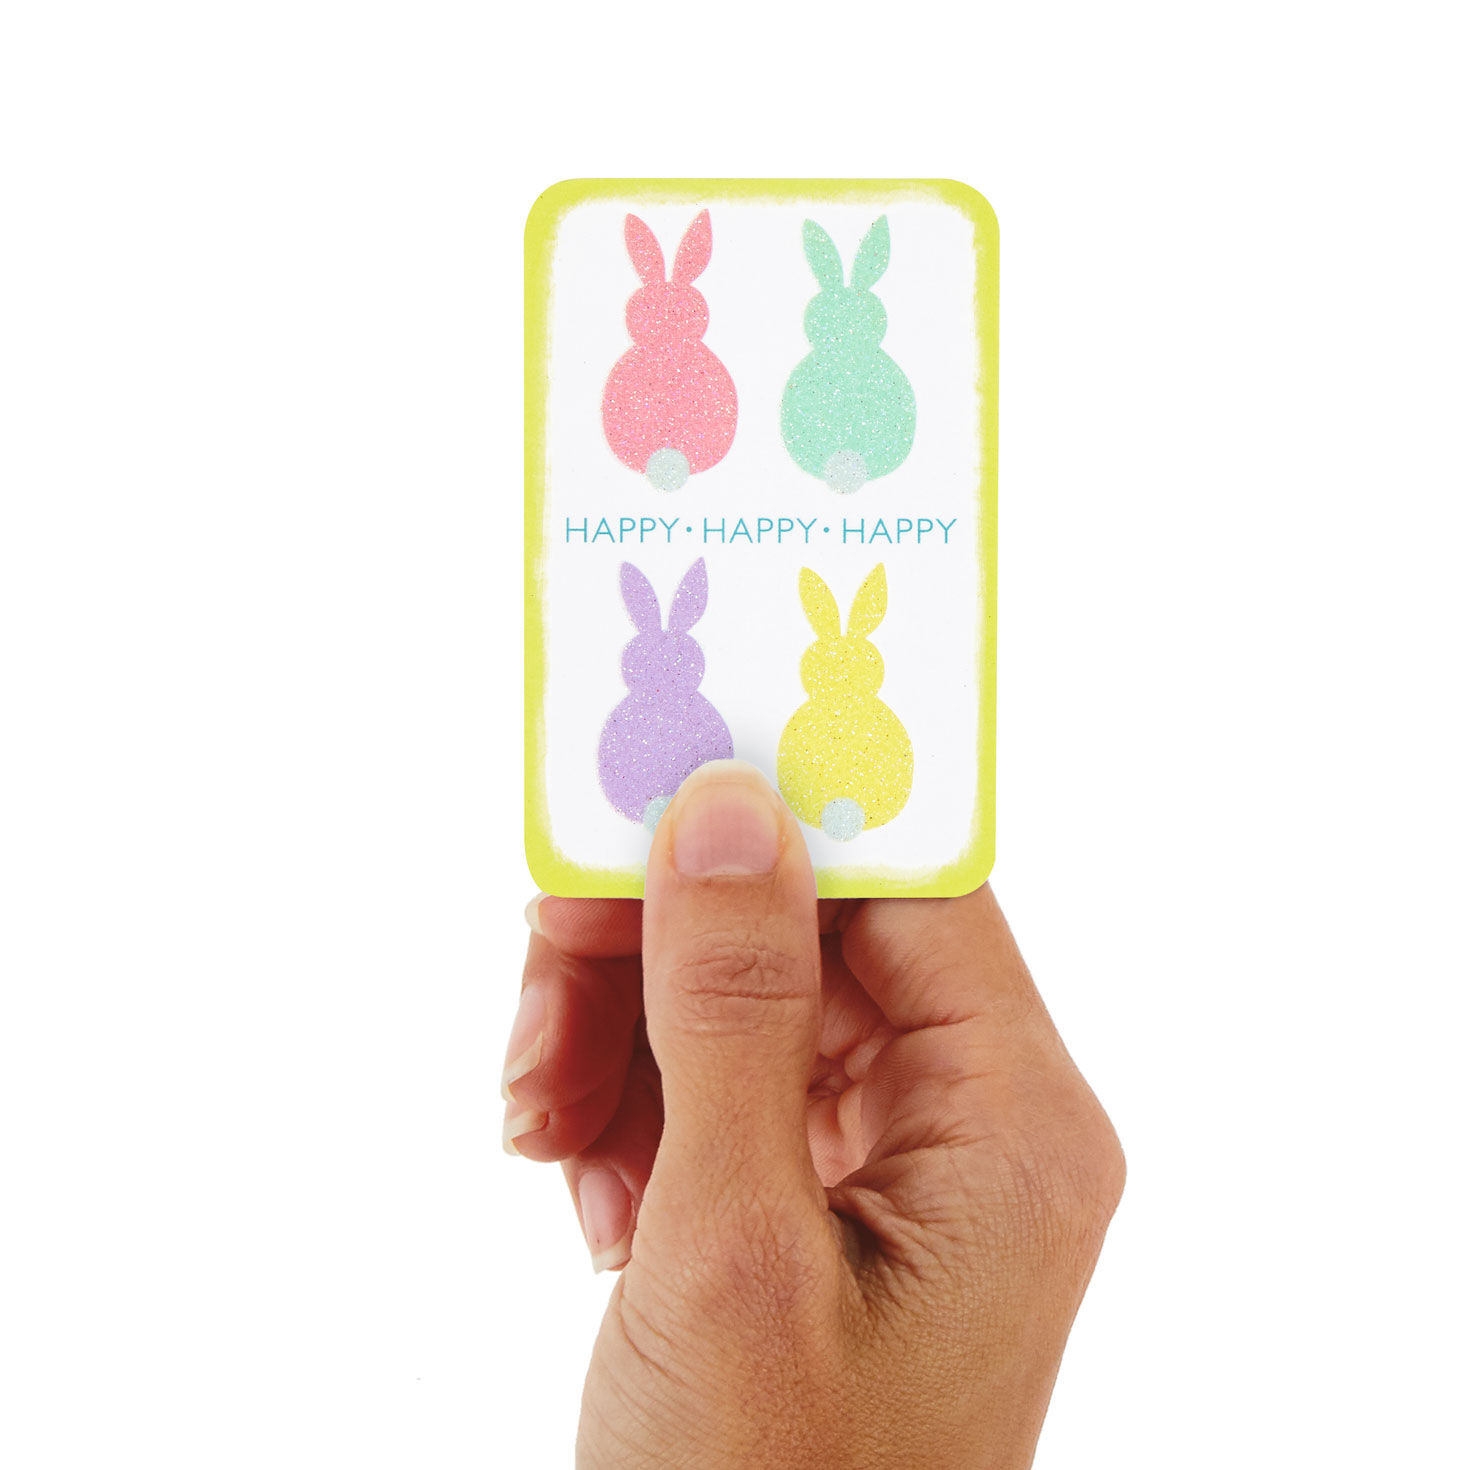 Hallmark Easter Greeting Card for Husband Warm and Loved Feelings at Easter